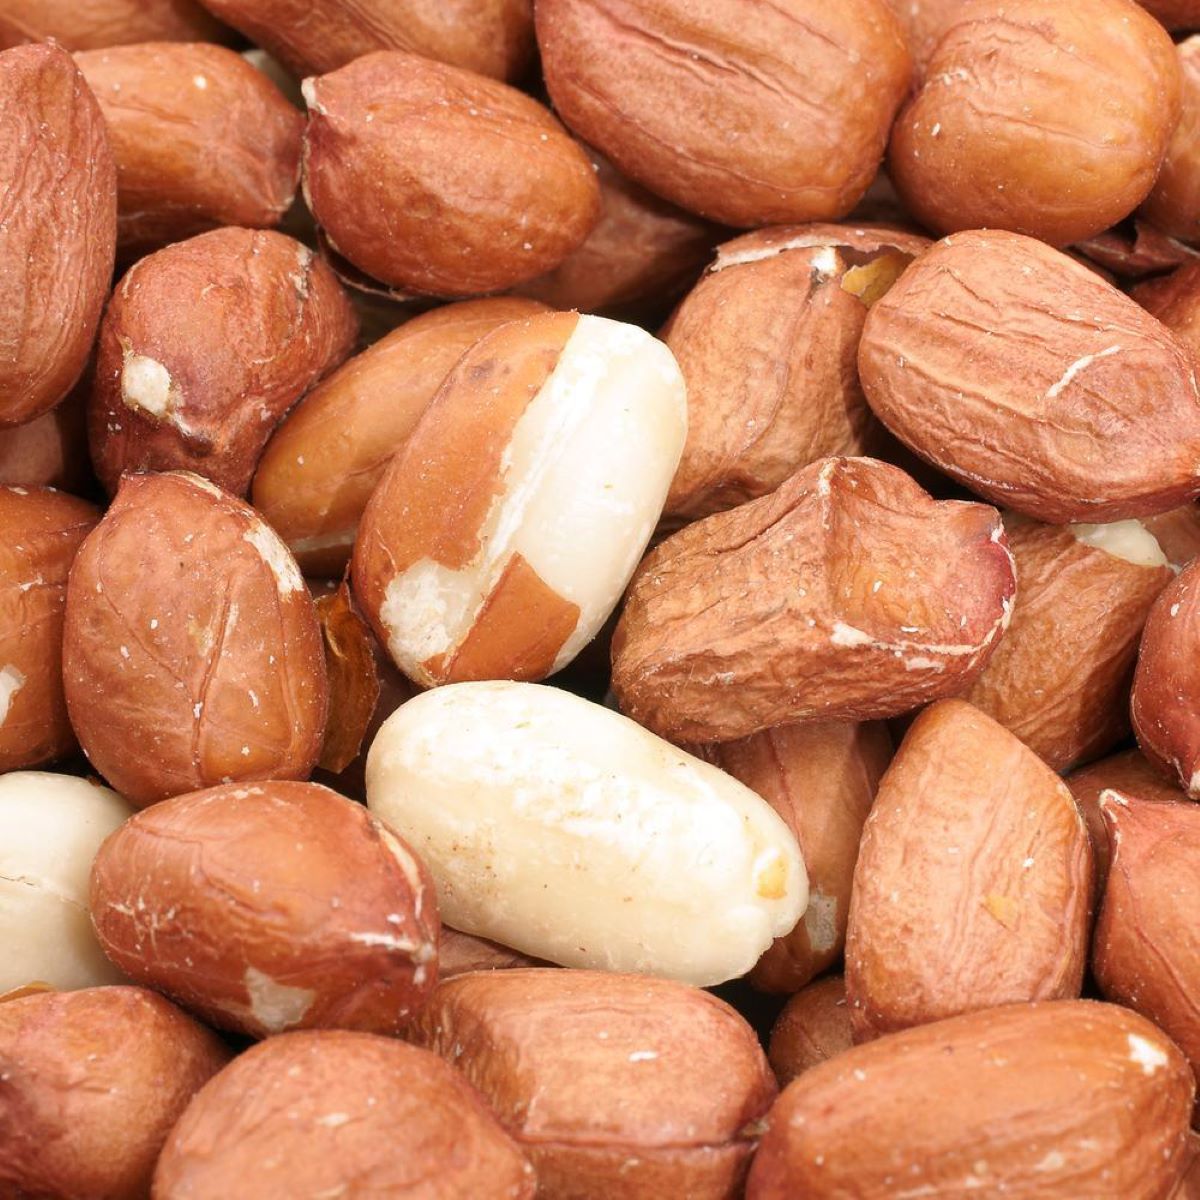 How To Store Unshelled Peanuts